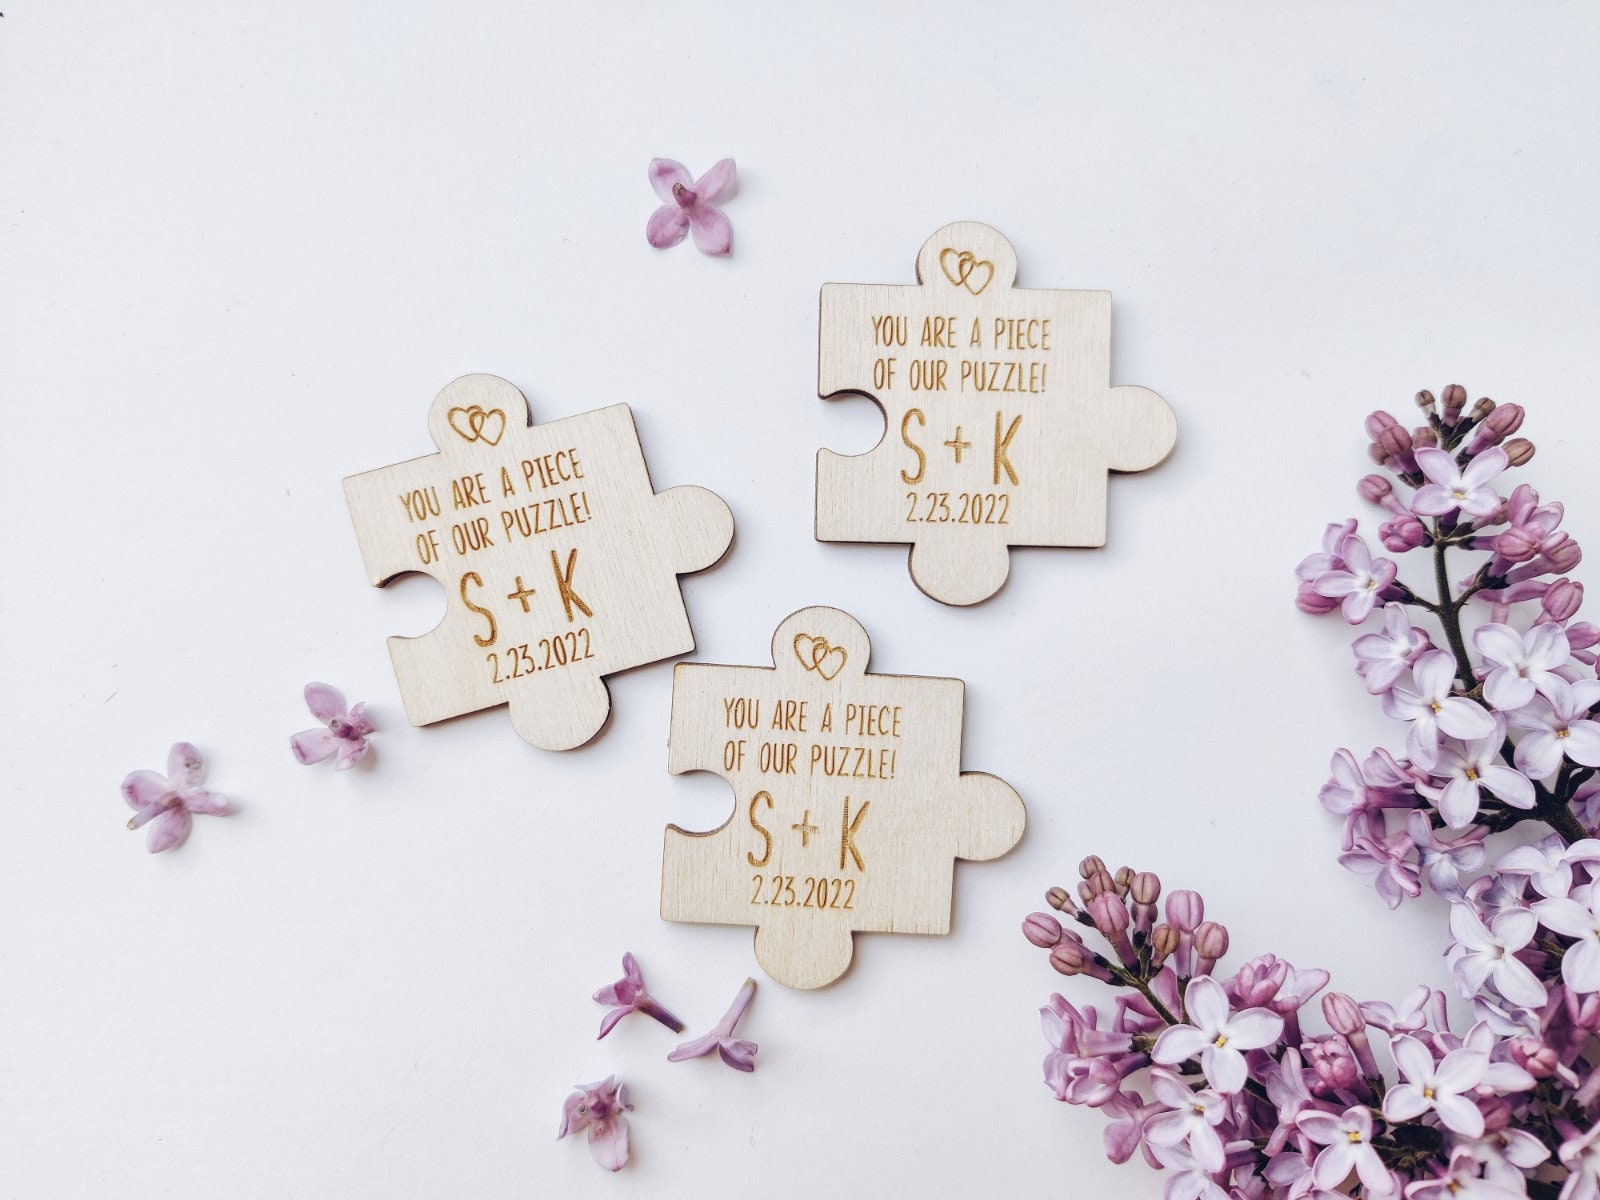 Puzzle Wedding Favor, Thank You Magnets, Save The Date Magnets, Personalized Wedding Magnets For Guests, Thank You Favors, Puzzle wedding